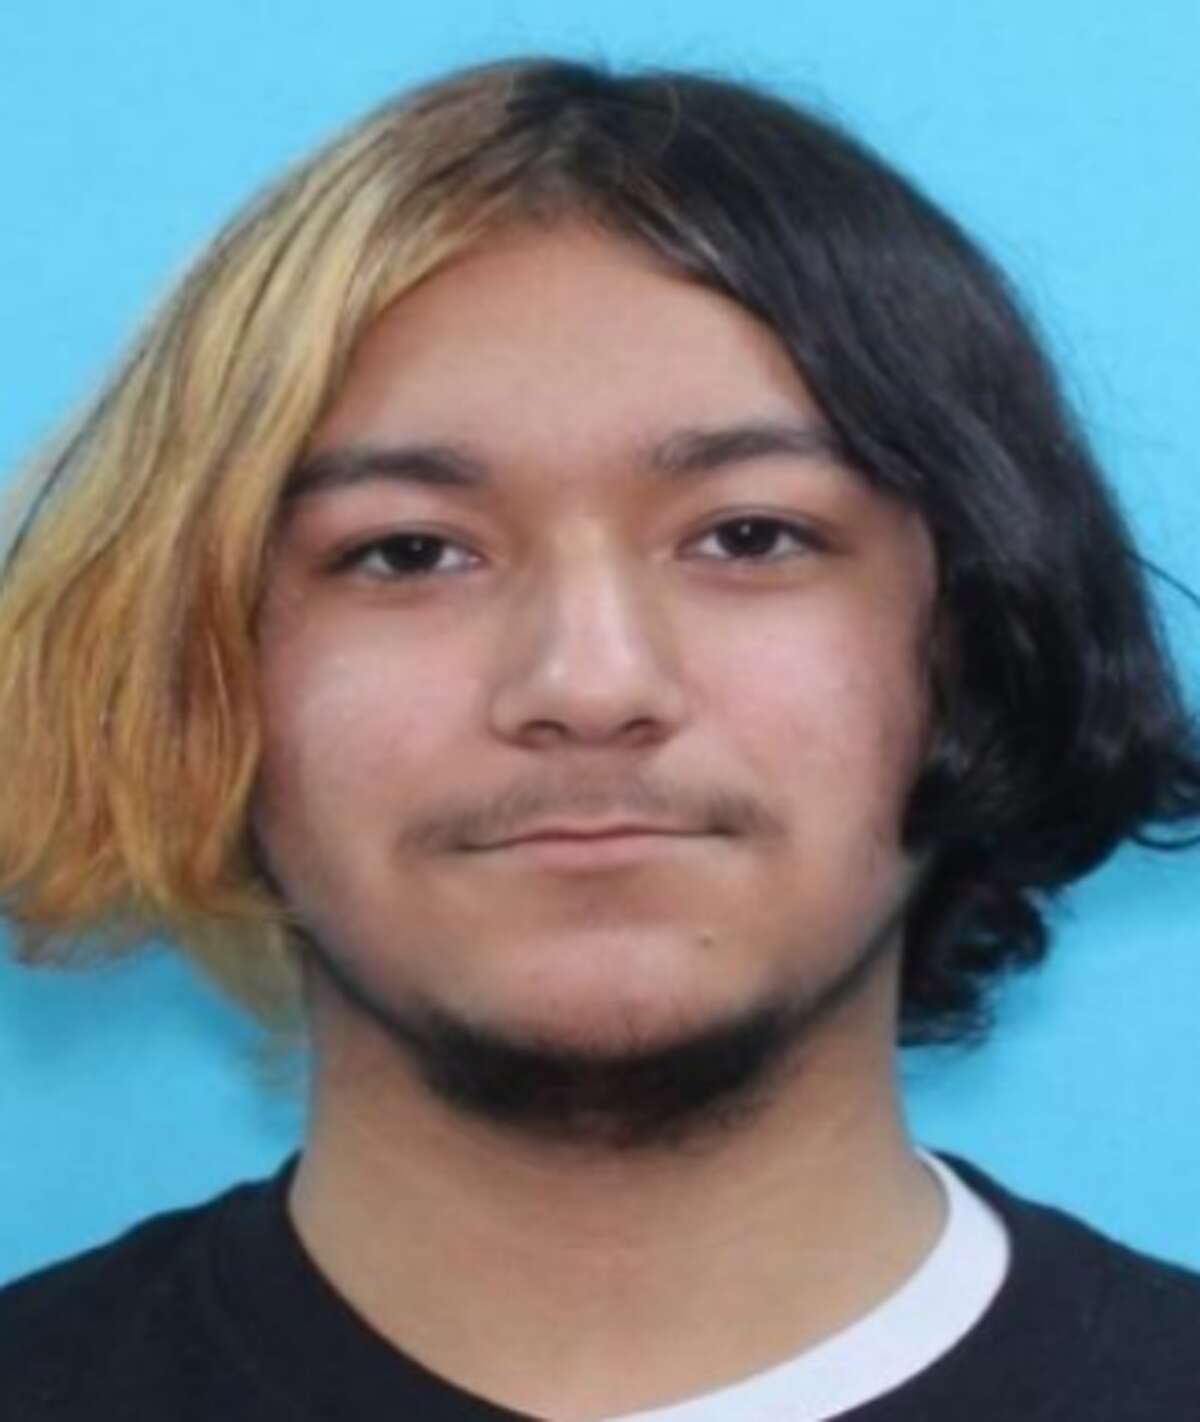 Angel Villalobos, 17,  is Laredo Crime Stoppers' Most Wanted individual of the week. The LPD said that Villalobos allegedly threatened his neighbors with a knife over a parking space on Sept. 5, 2022.